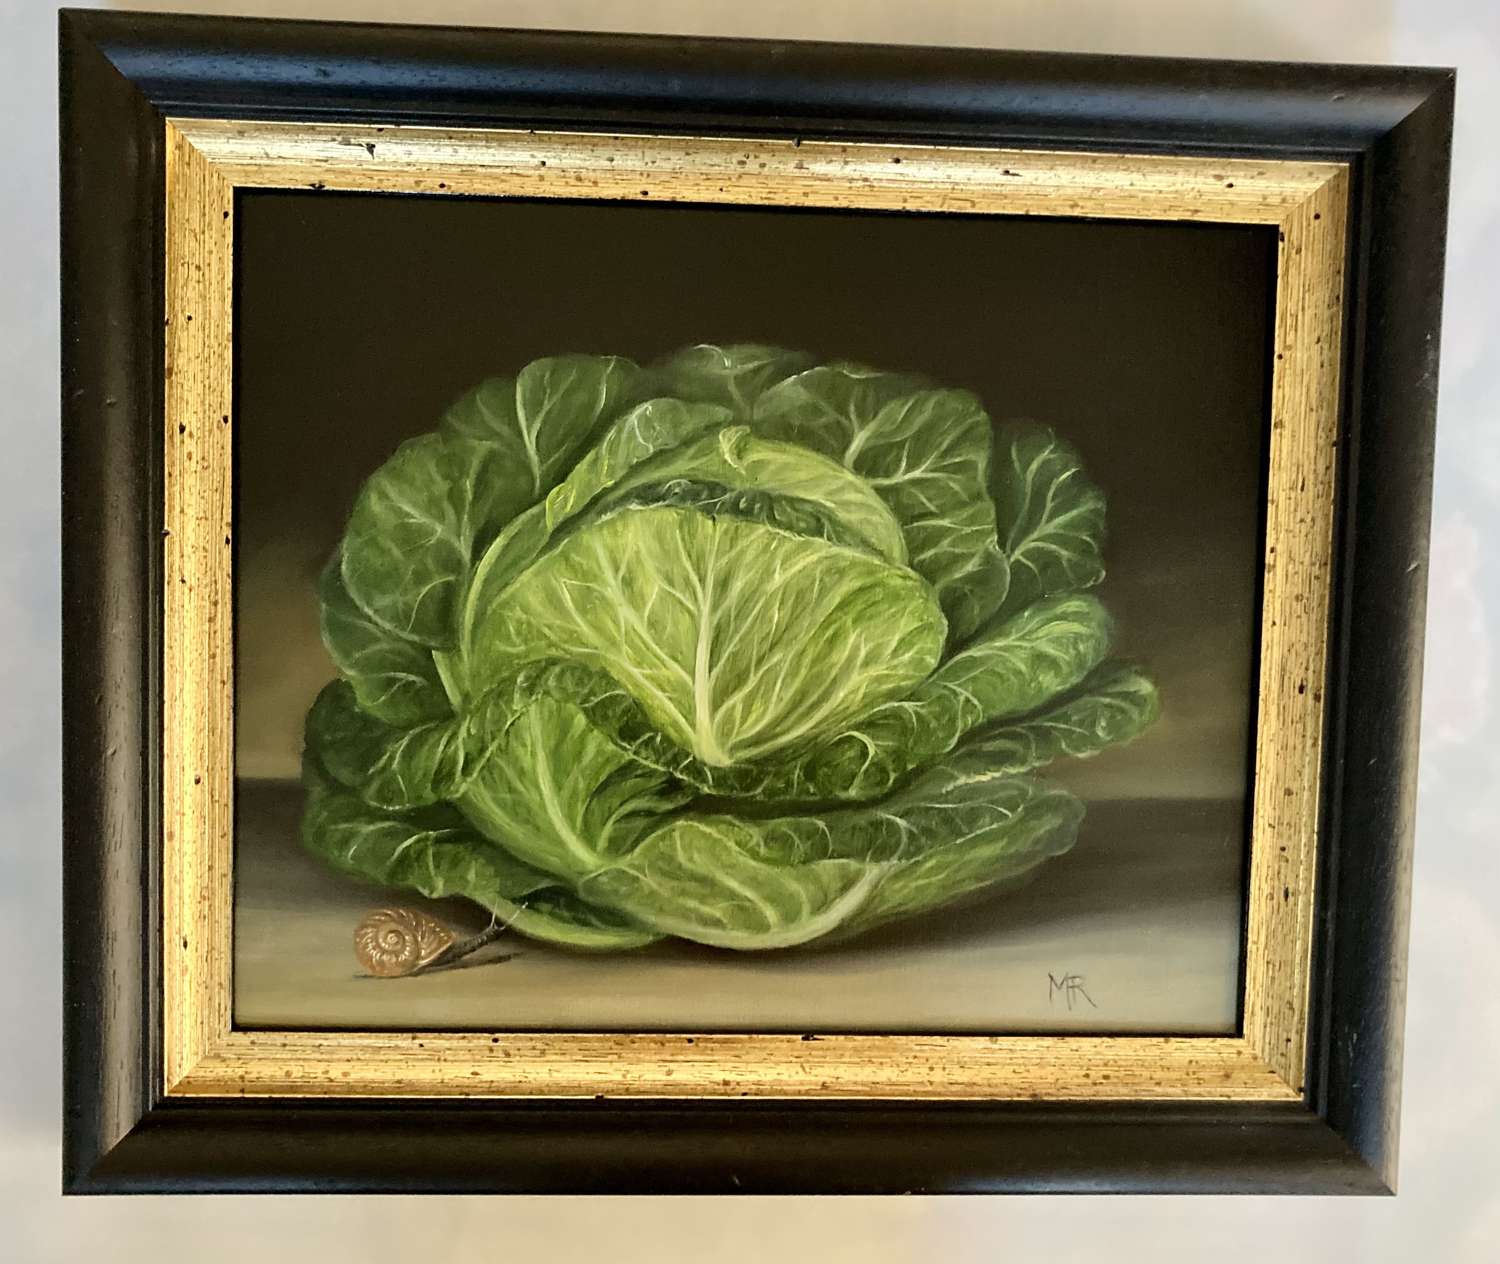 Cabbage and snail